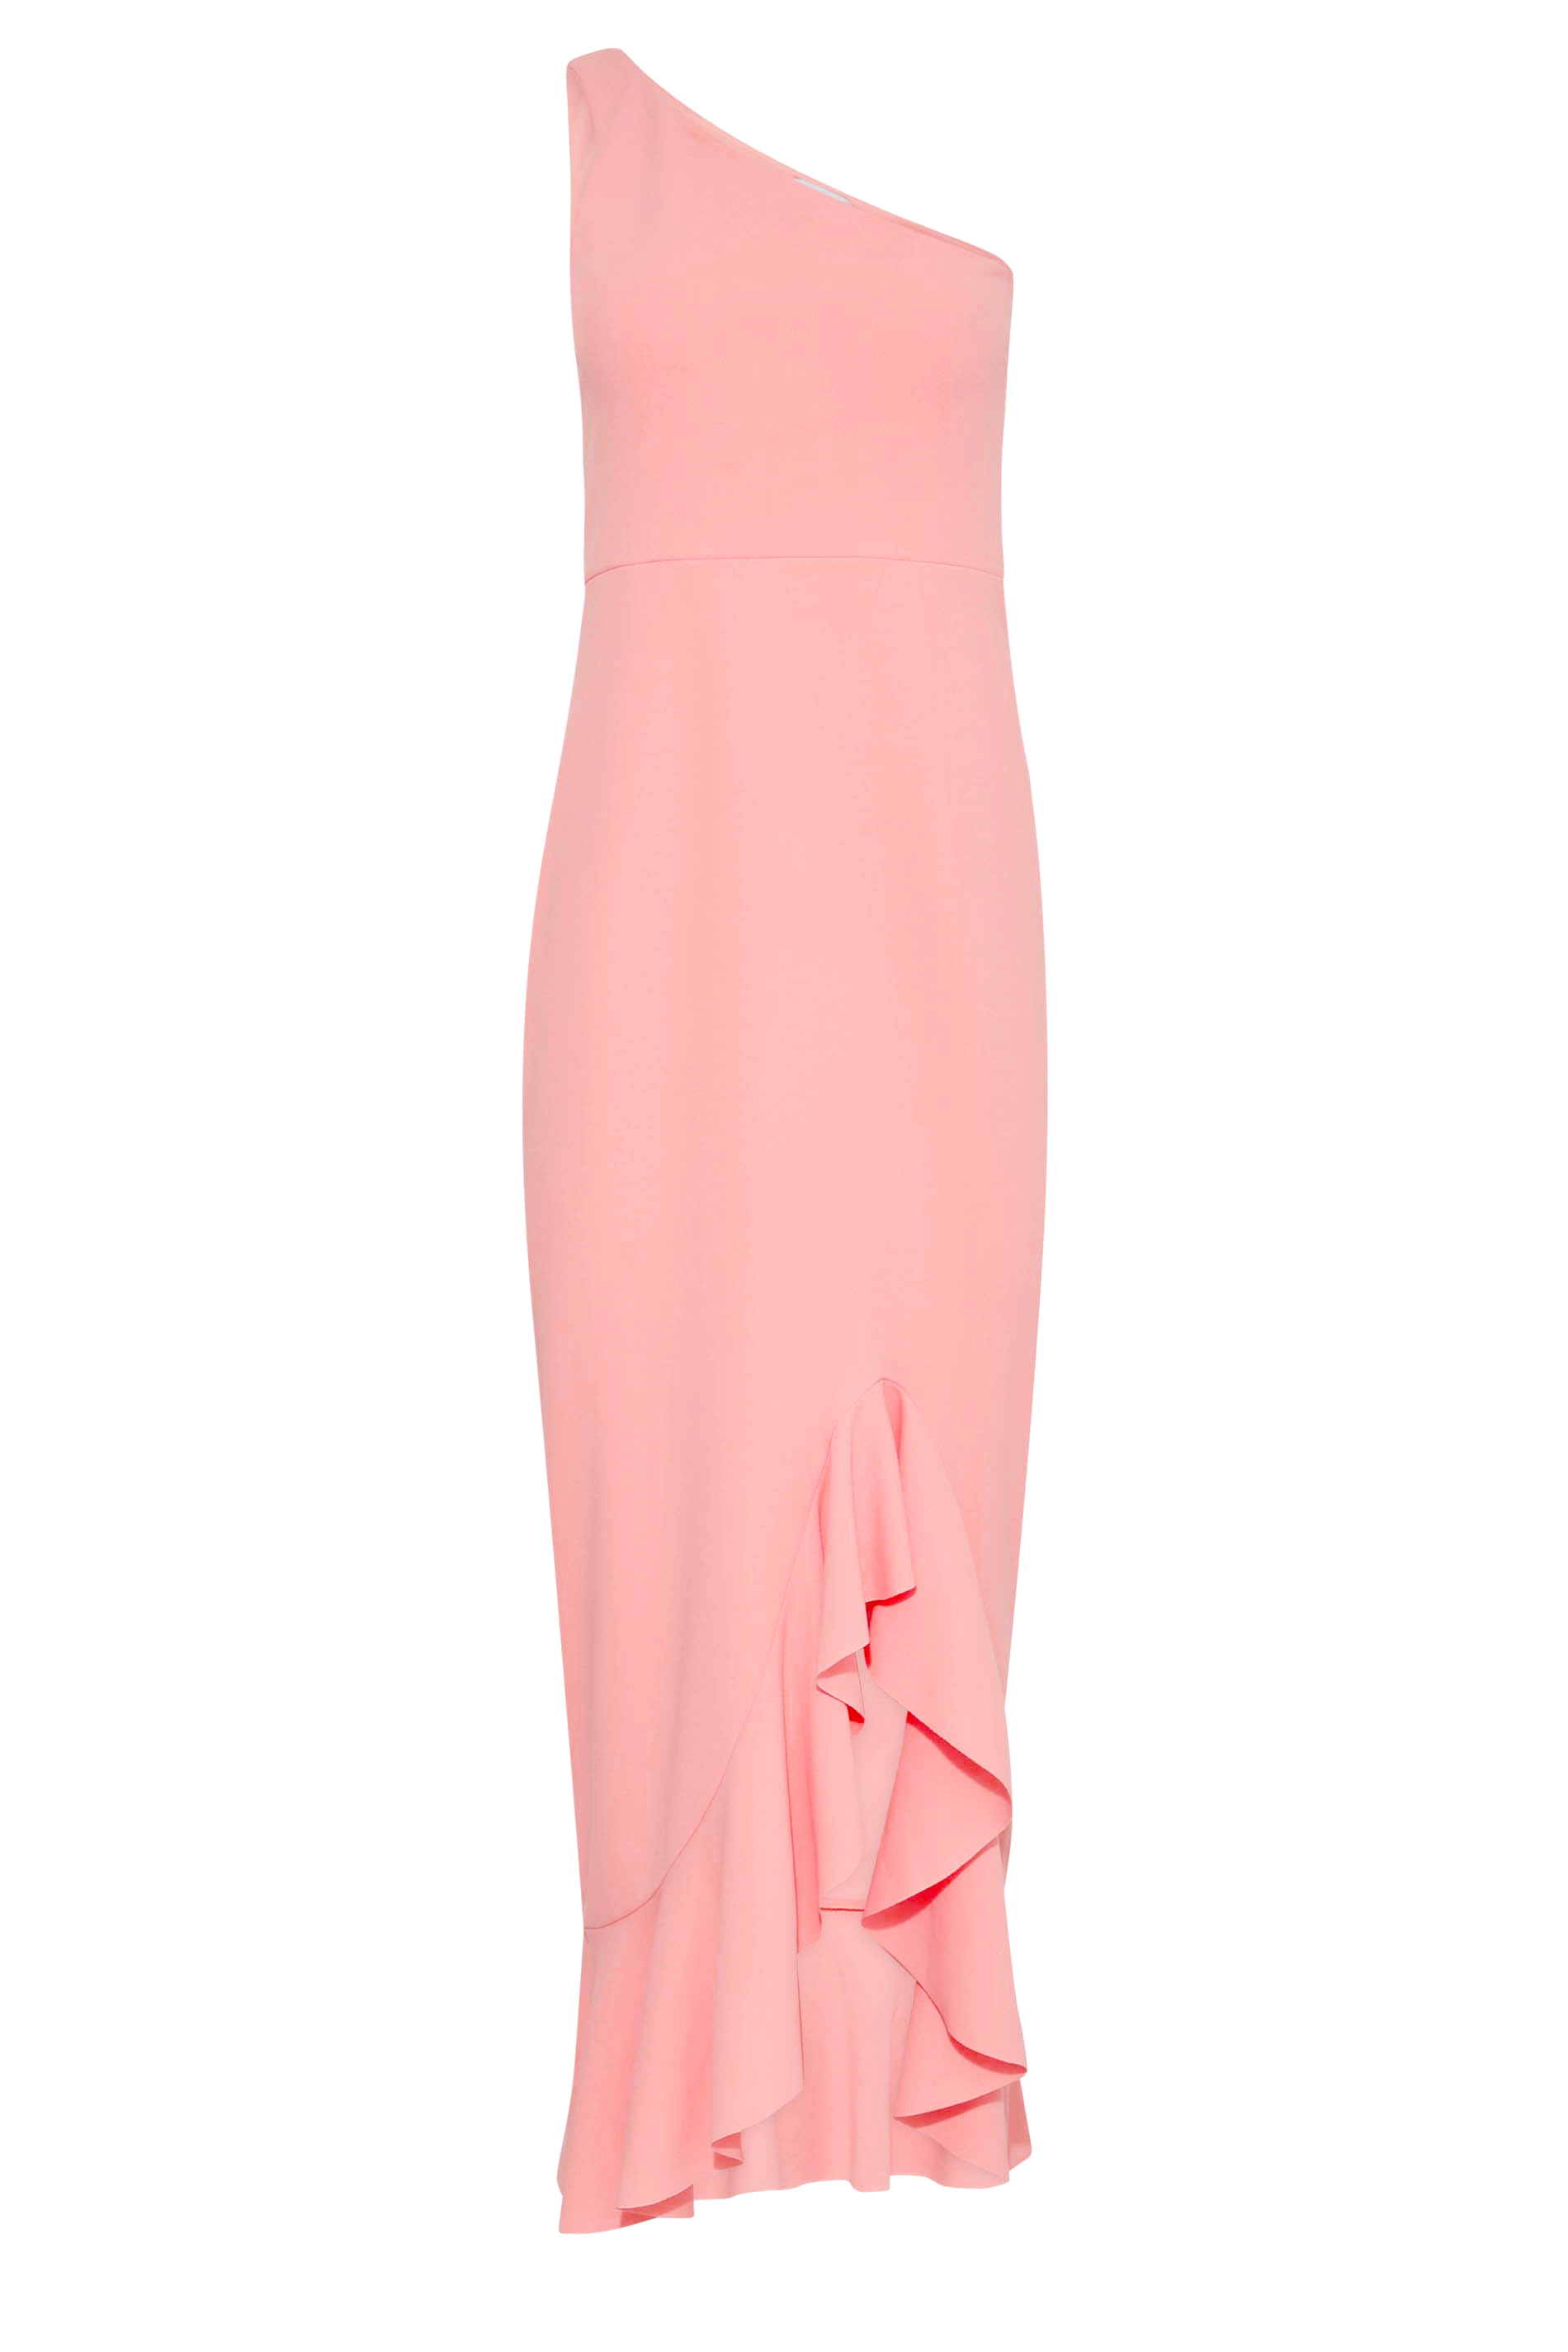 LTS Tall Women's Coral Pink One Shoulder Frill Dress | Long Tall Sally 2